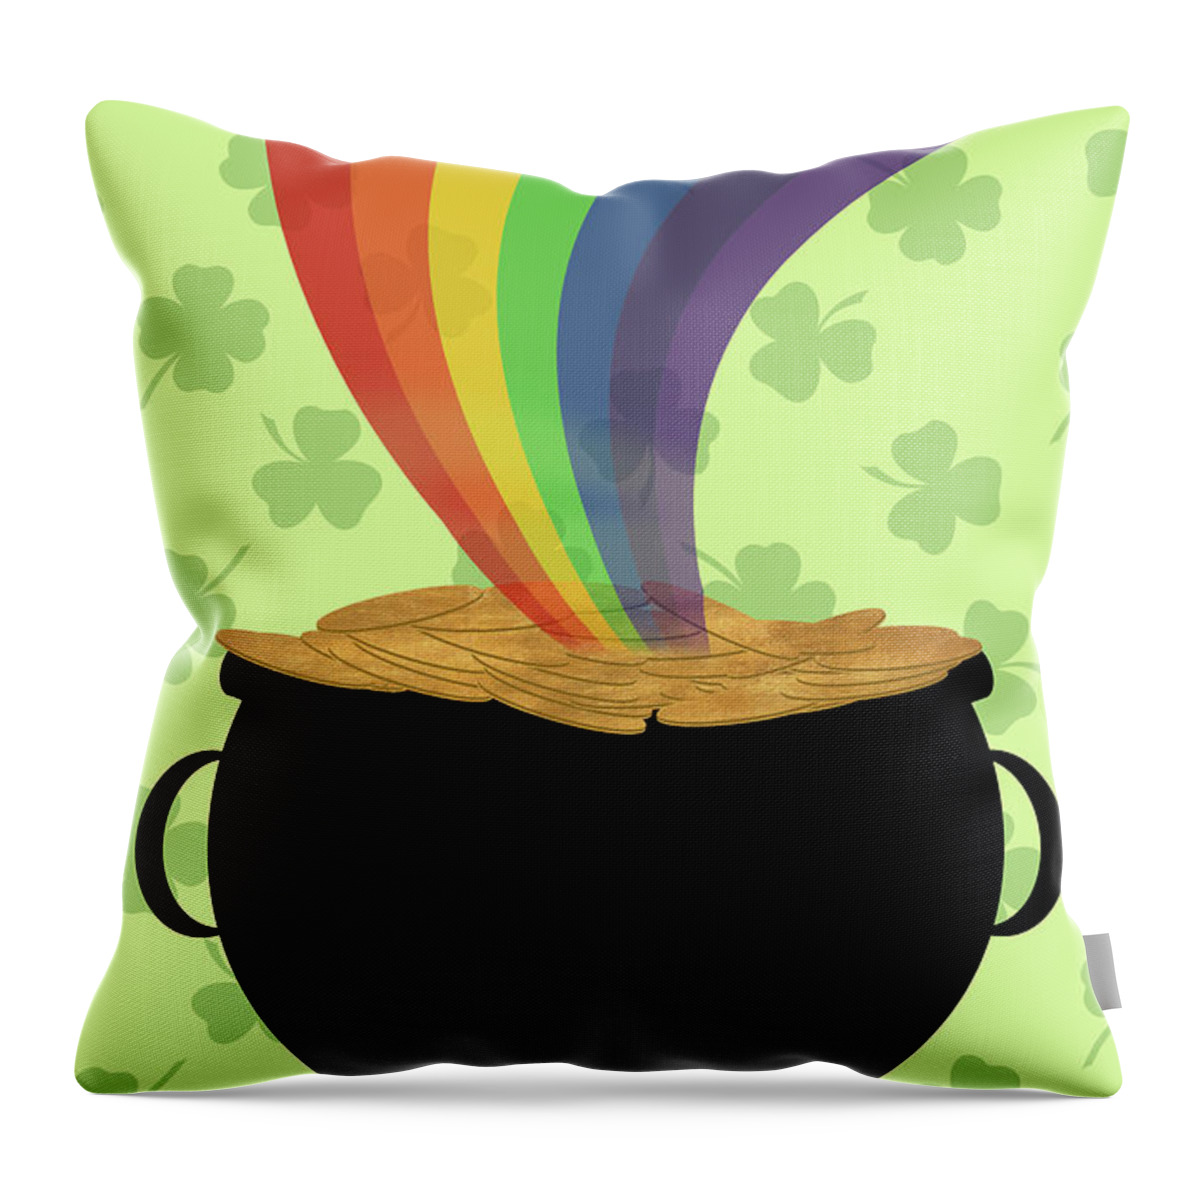 Pot Throw Pillow featuring the digital art Pot Of Gold I by Sd Graphics Studio